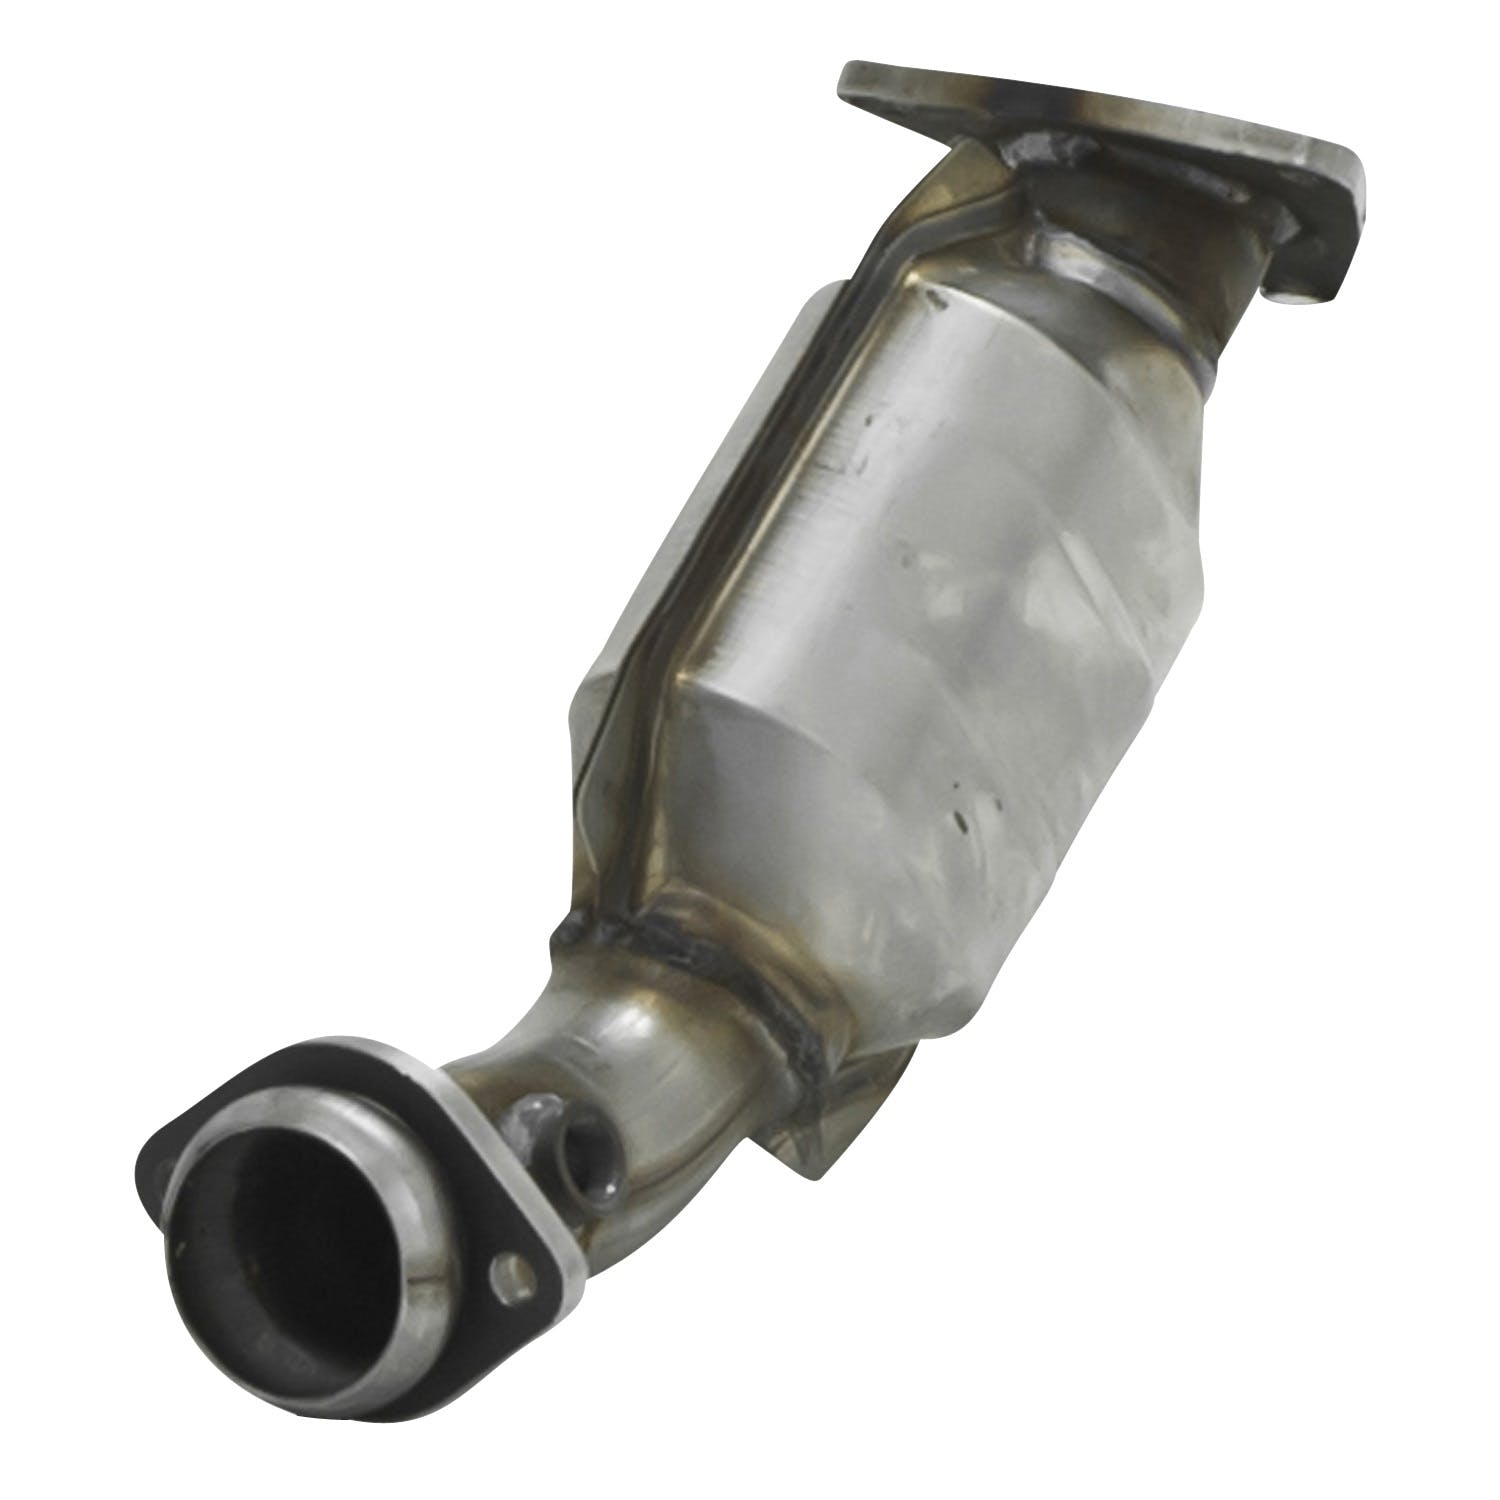 Flowmaster Catalytic Converters 2010008 Catalytic Converter-Direct Fit-2.25 Inlet/Outlet-Left-49 State